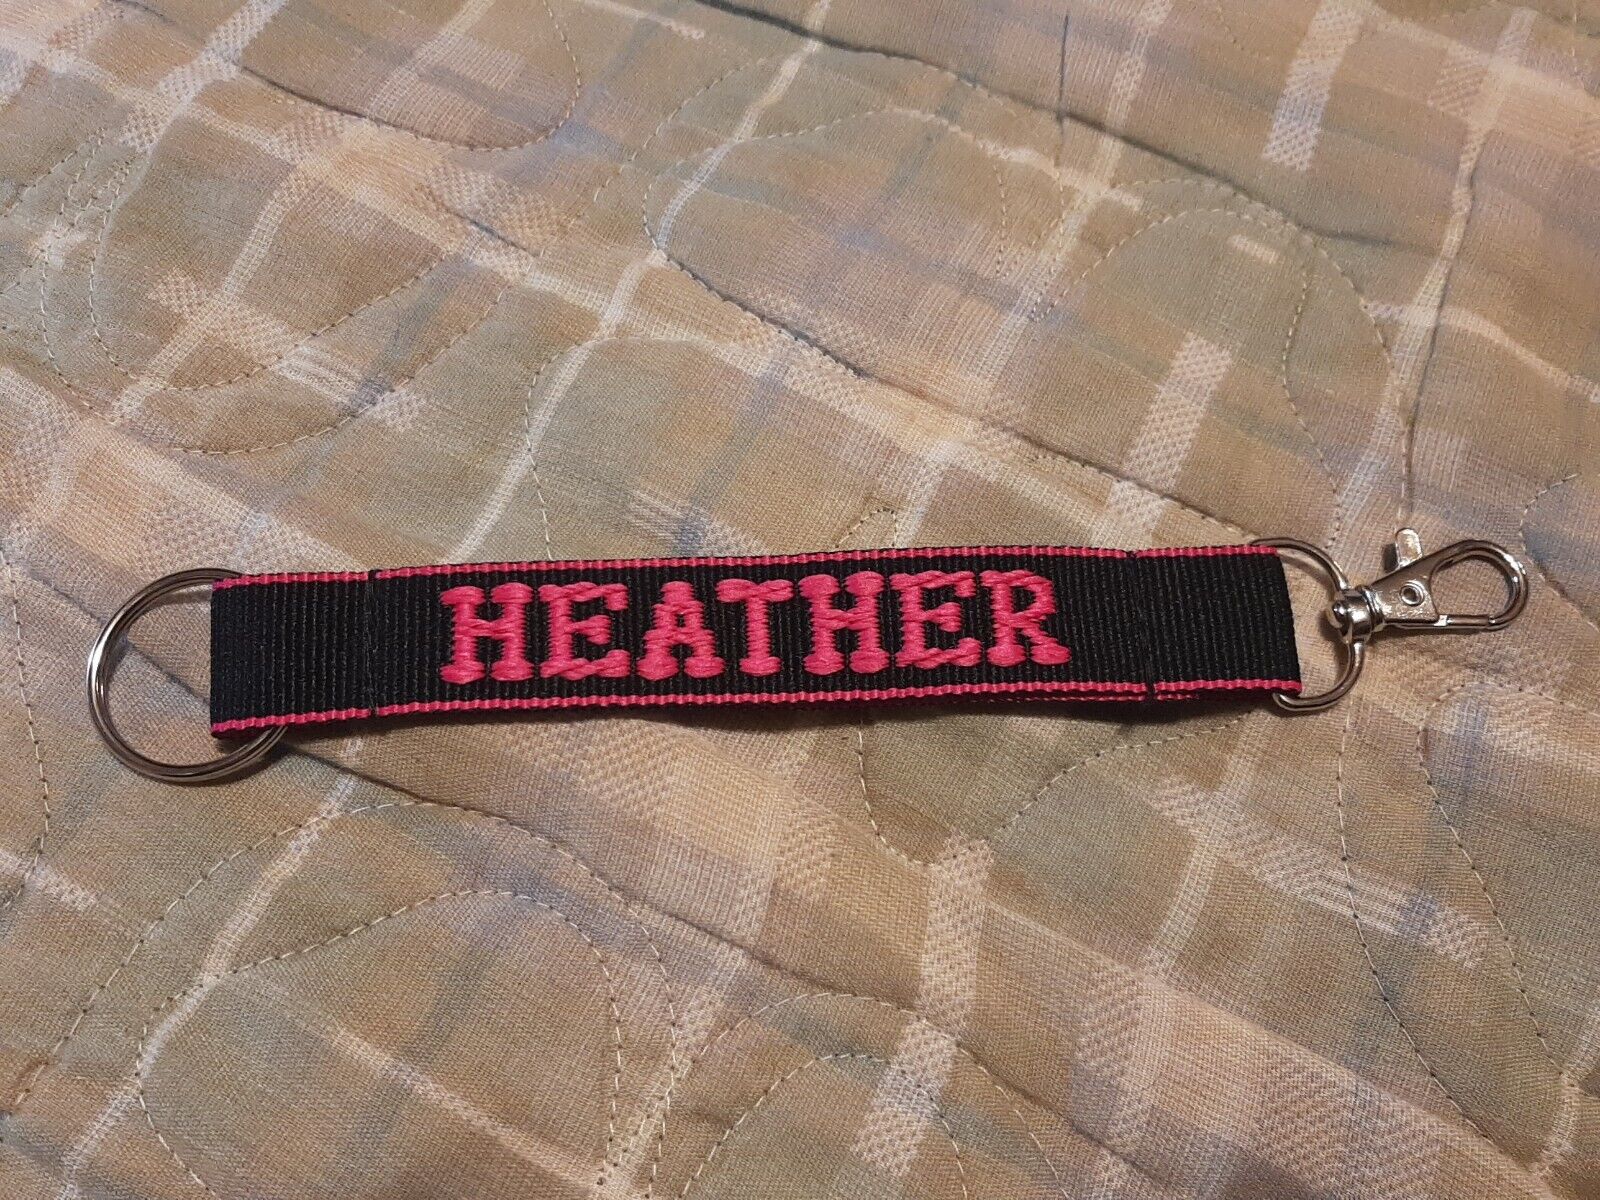 HEATHER Embroidered Name Strap Key Ring, Keychain with Clasp (BLACK)